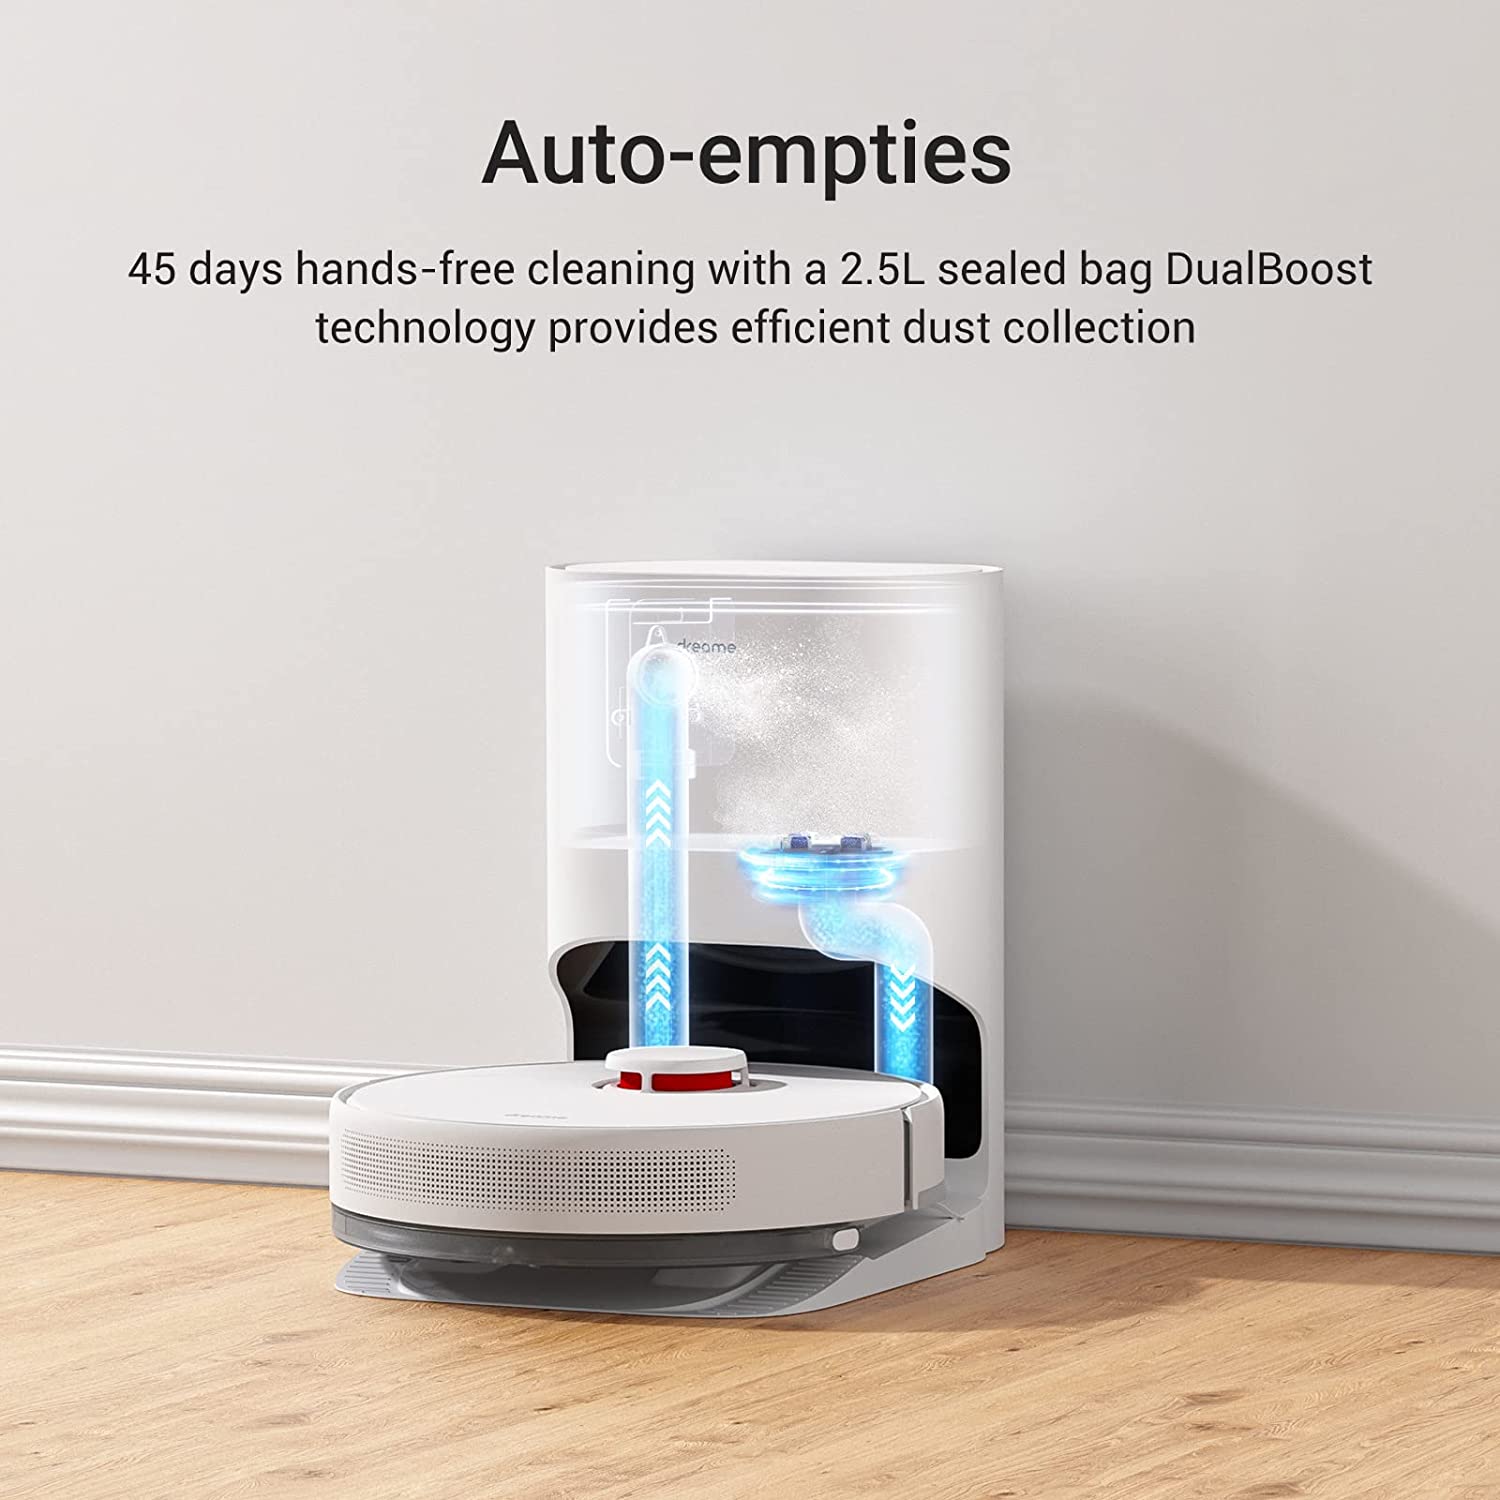 Dreamebot's self-emptying robot vac comes with a dreamy price tag